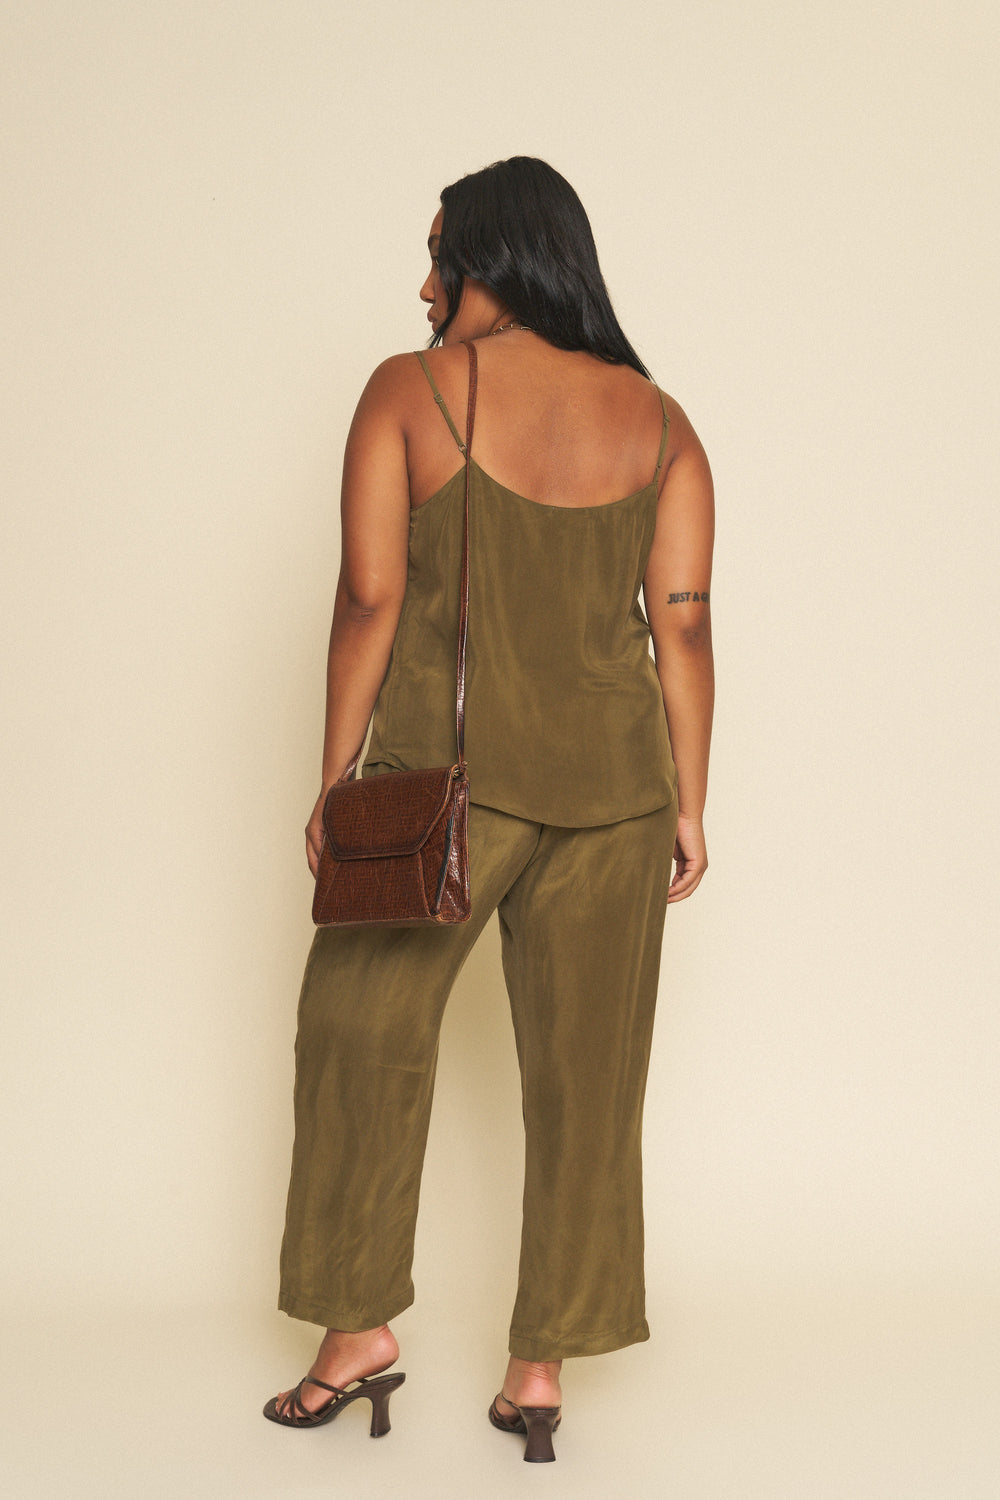 Rowen Pant in Olive - Whimsy & Row